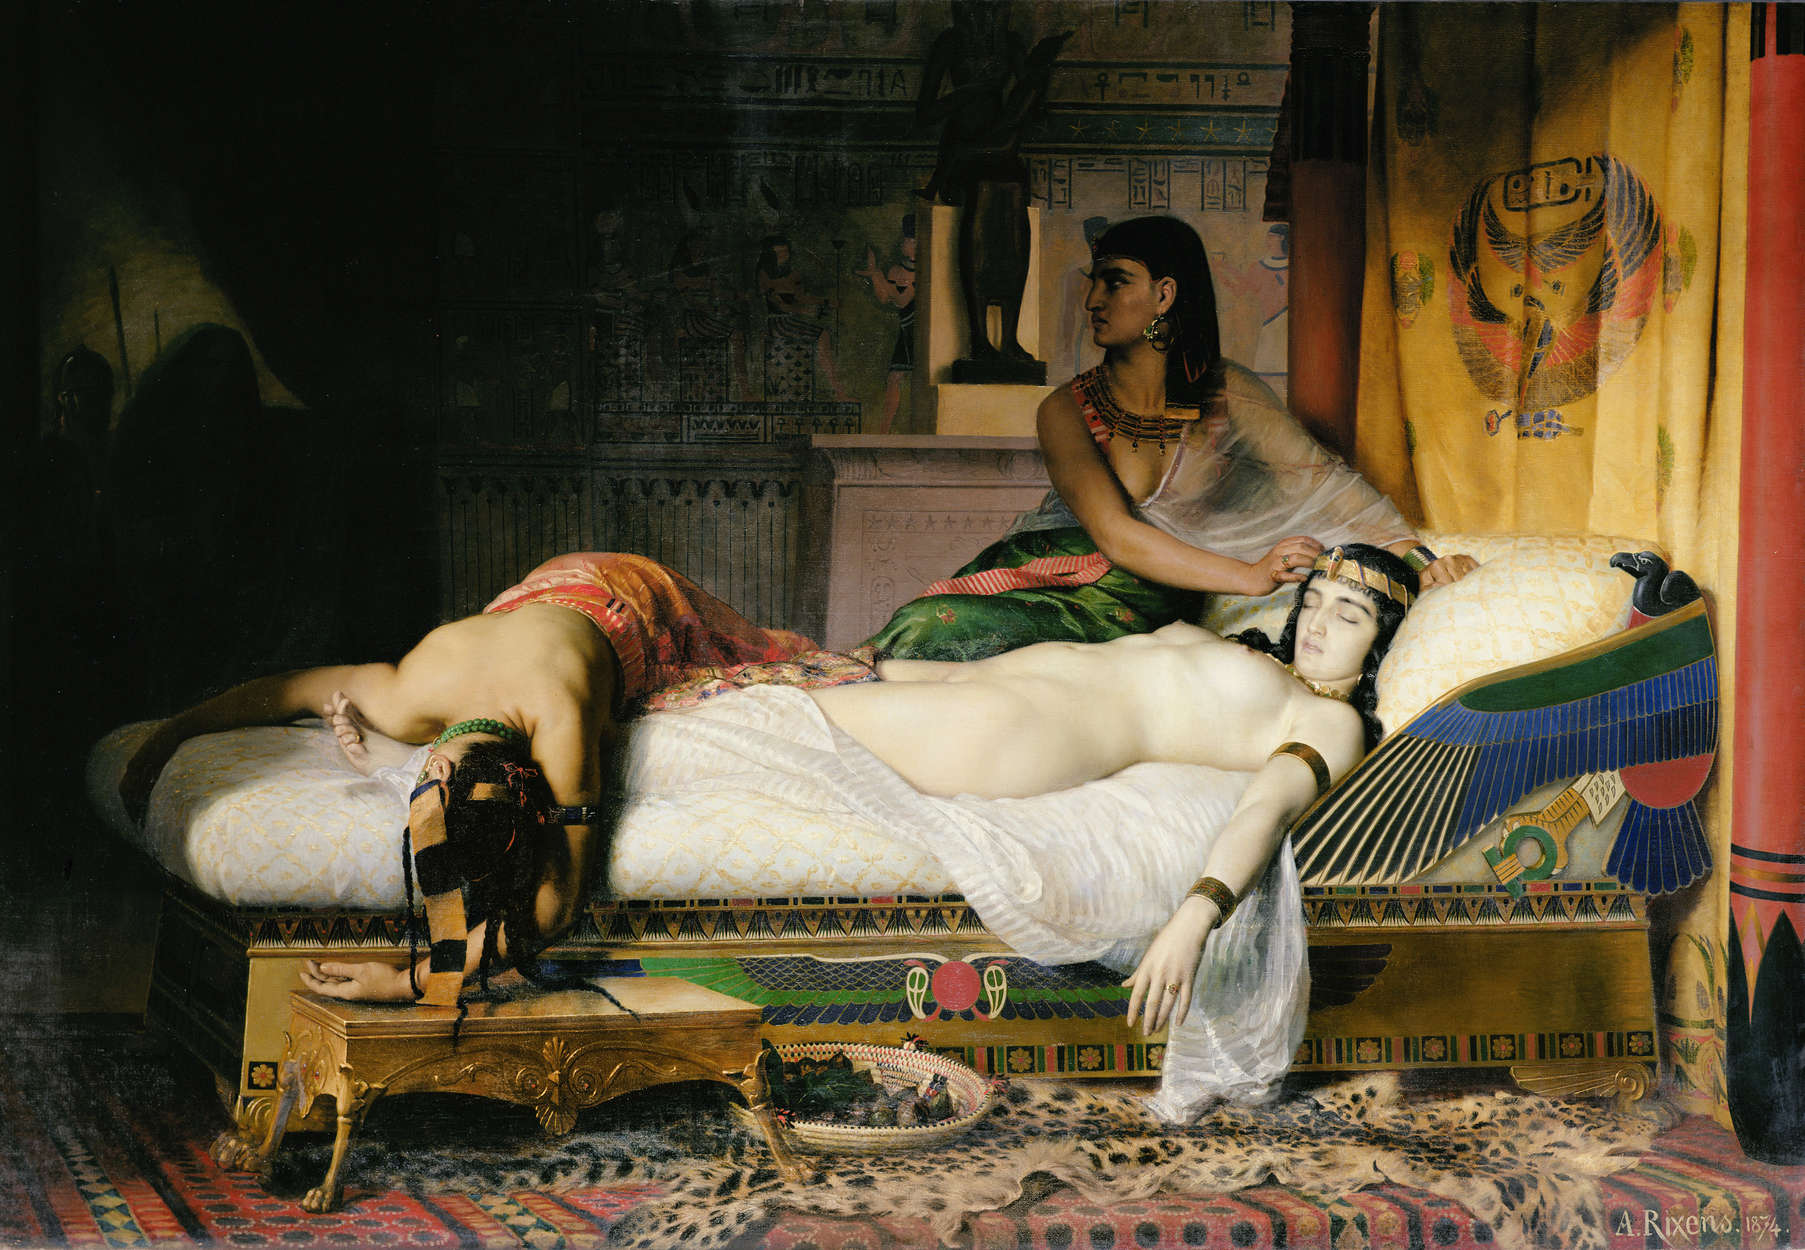             Photo wallpaper "The death of Cleopatra" by August Rixens
        